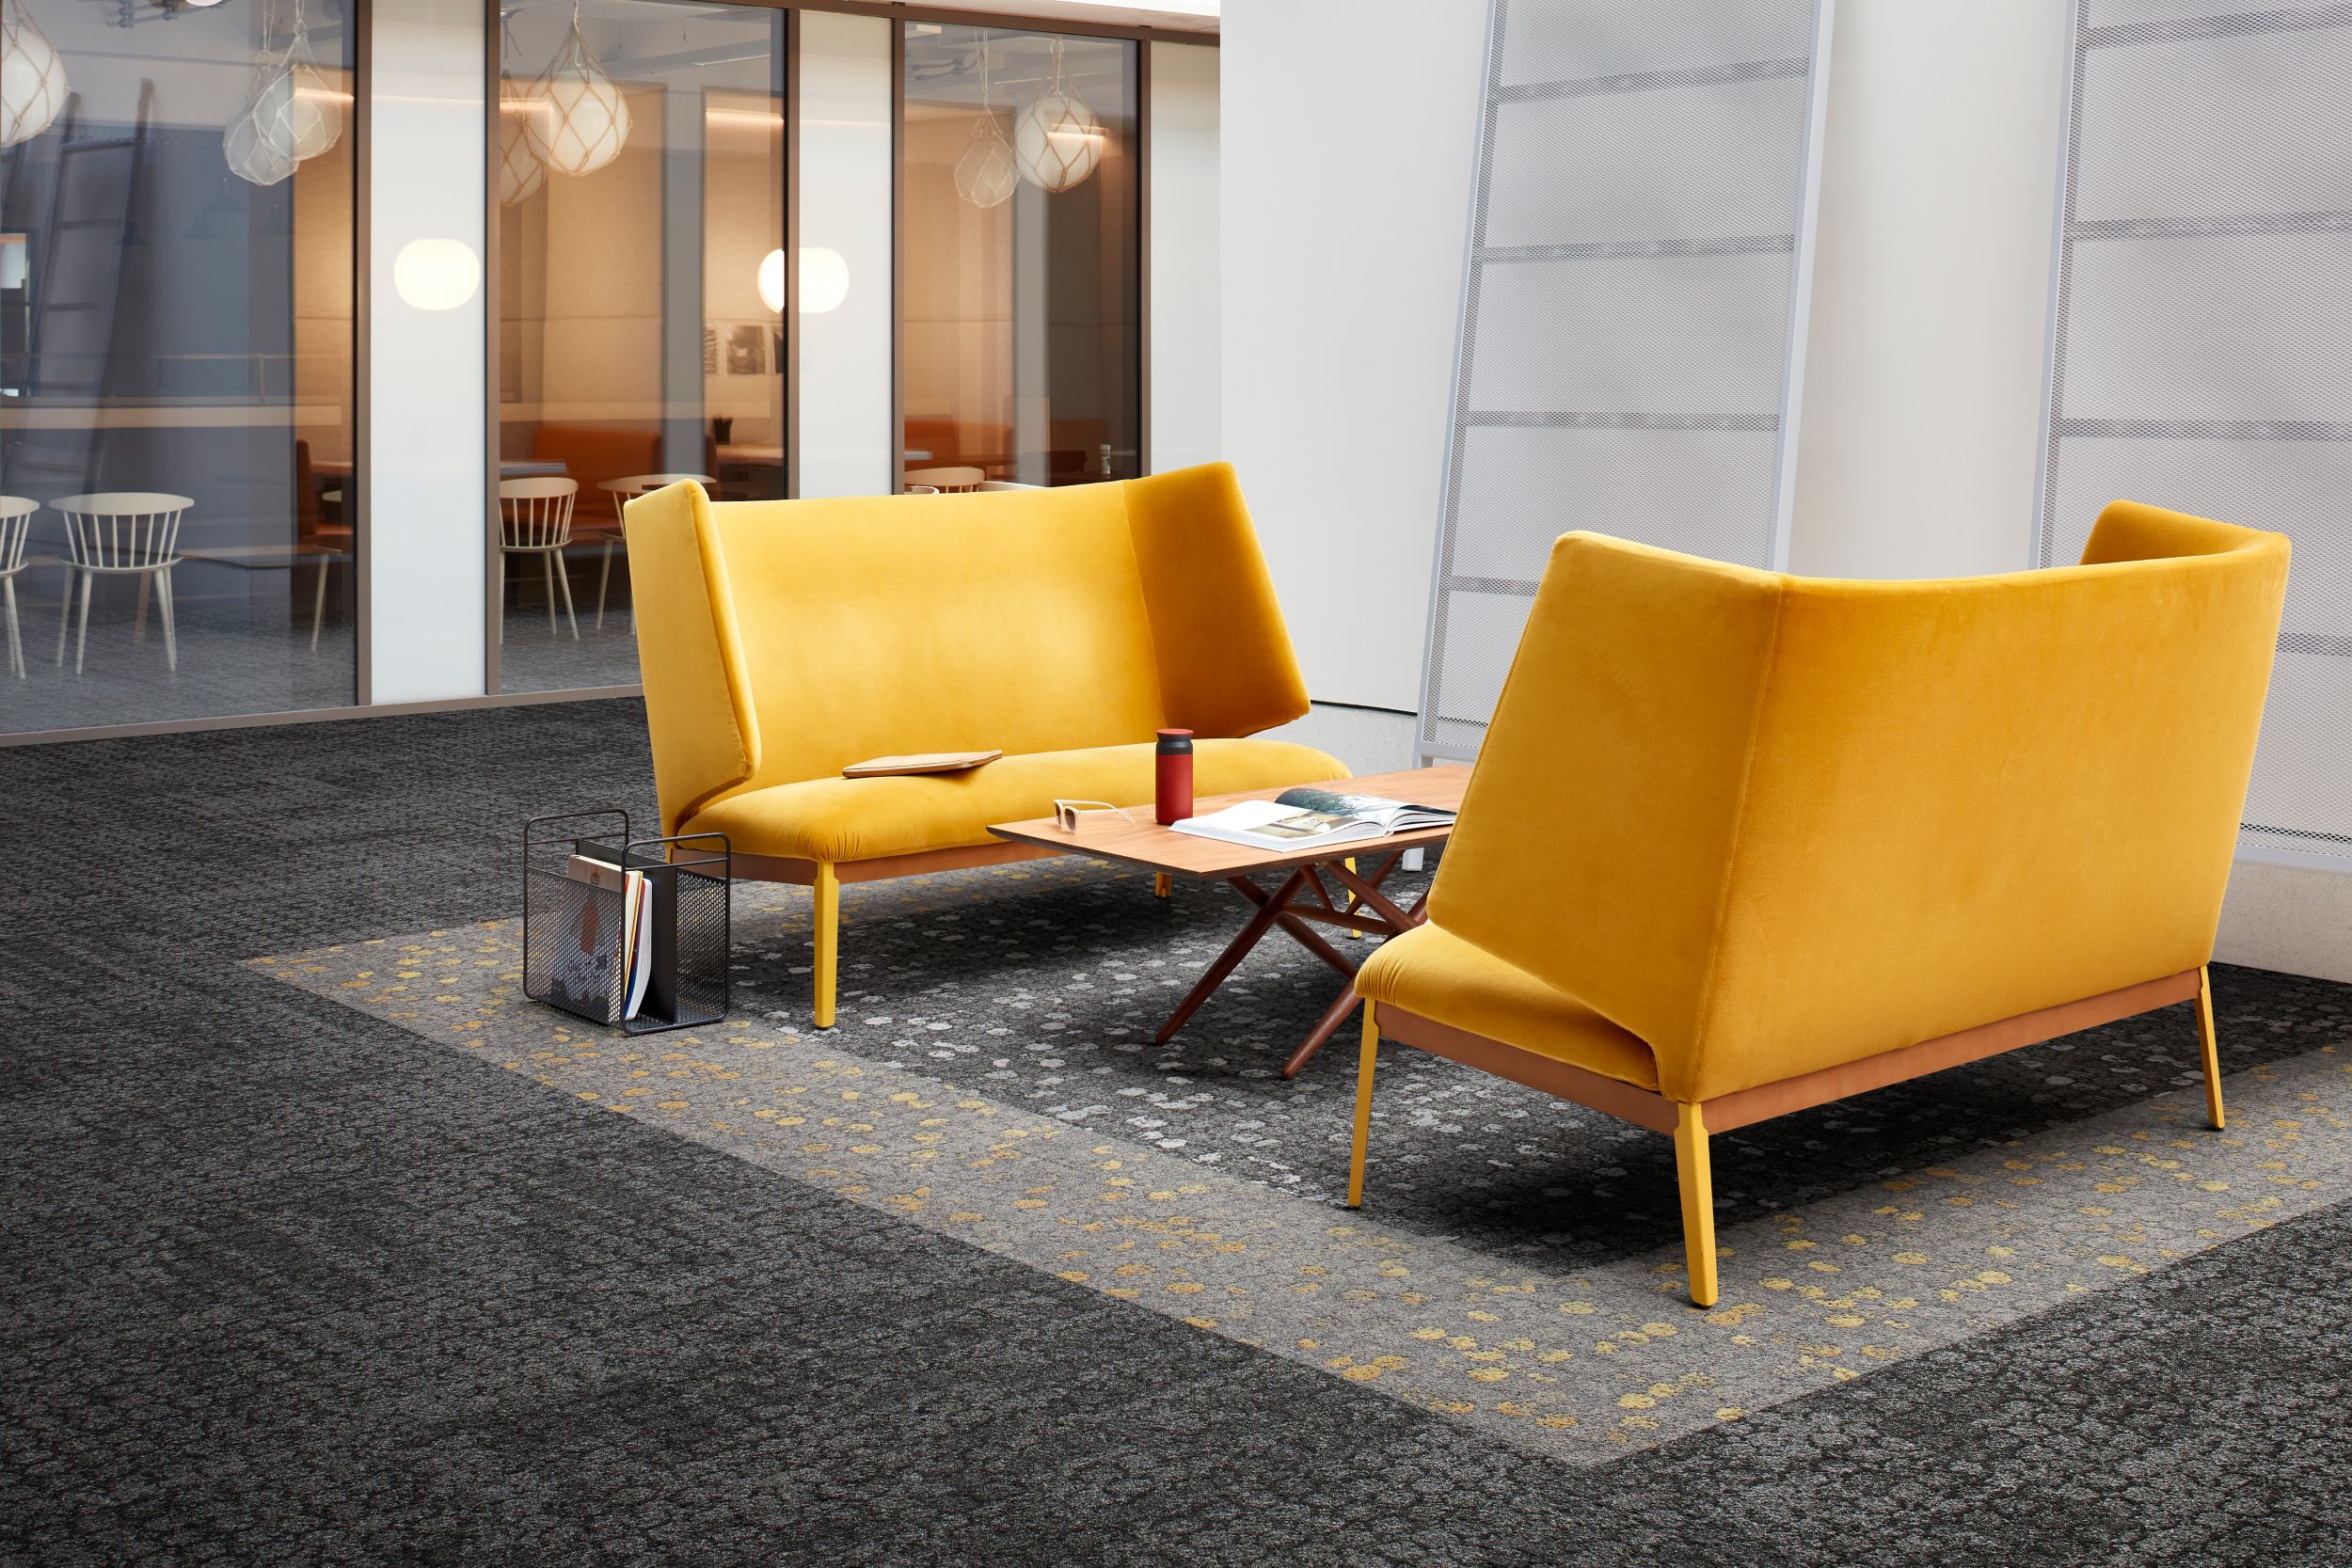 Interface Mercer Street and Broome Street carpet tile in seating area with two yellow couches número de imagen 9